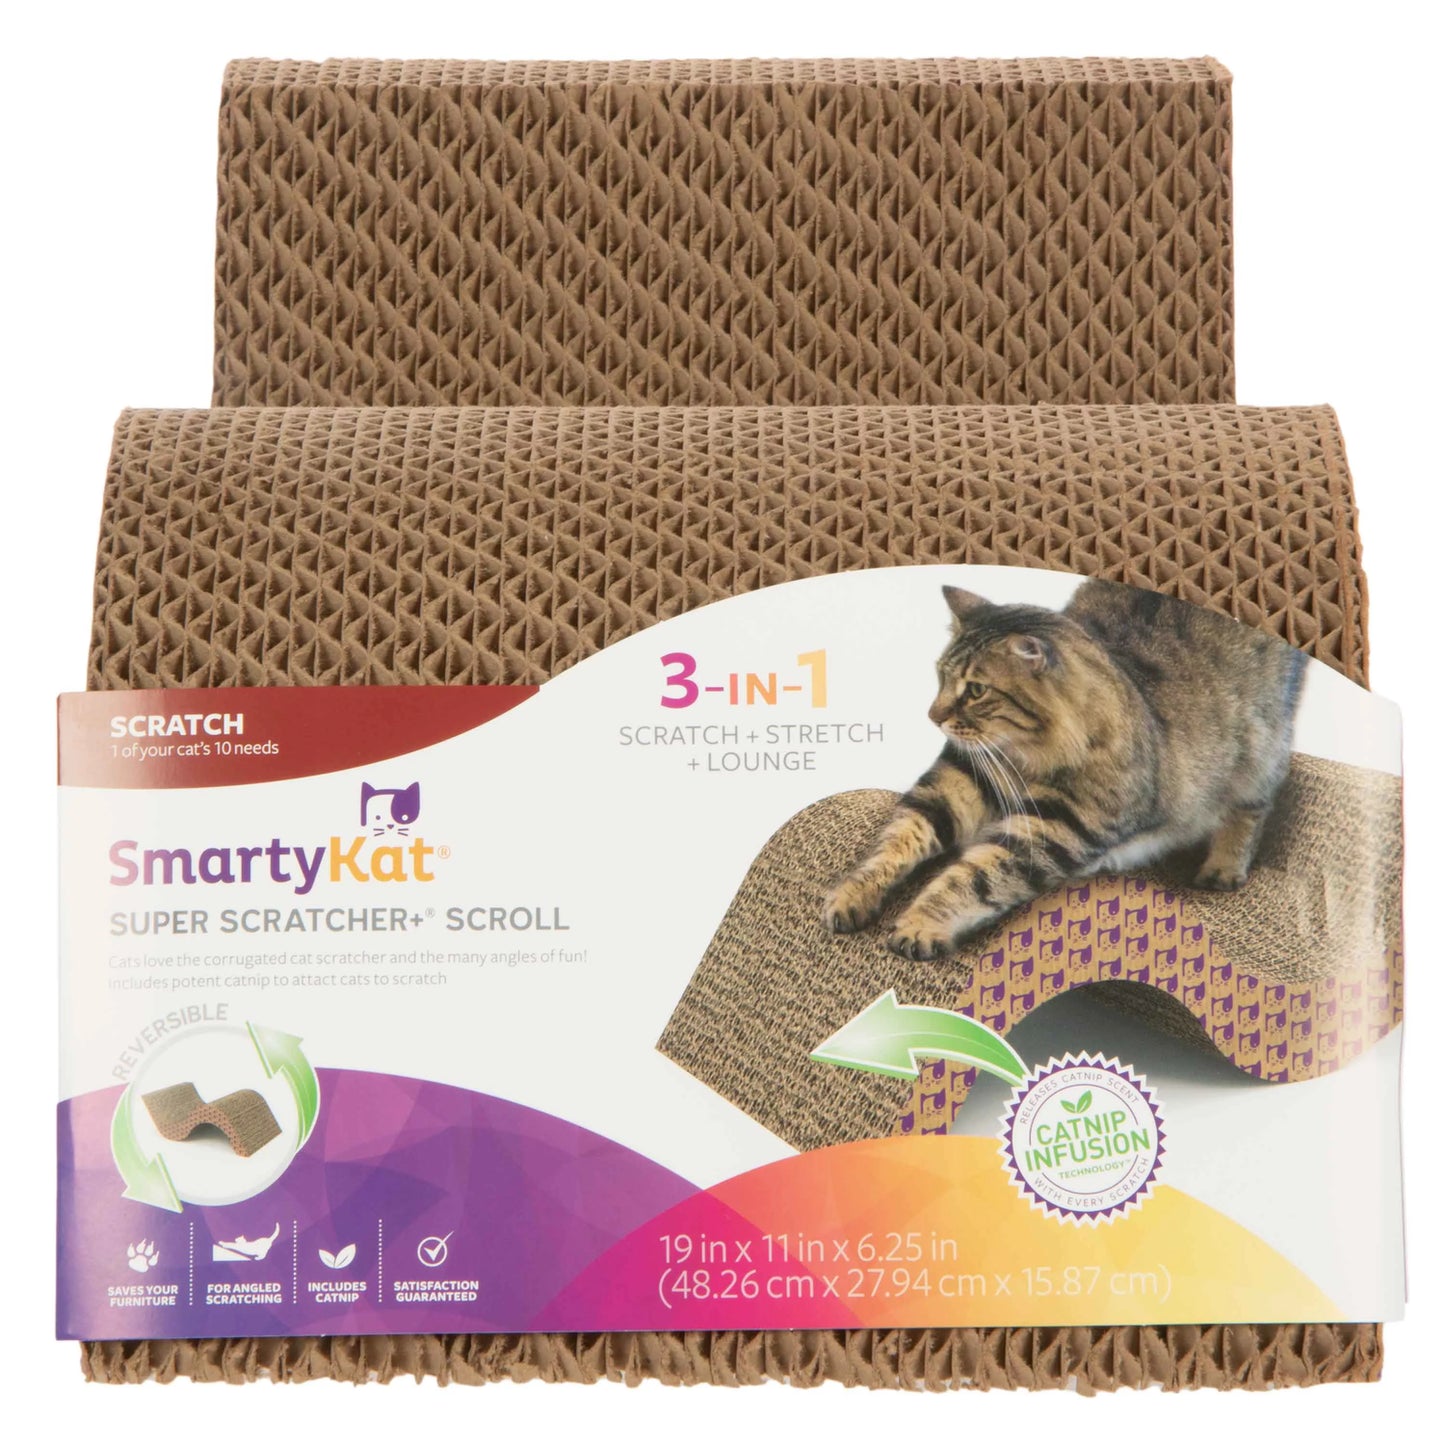 Smartykat Super Scratcher+ Scroll with Catnip Infusion Technology Corrugate Cat Scratcher, Hideout, and Lounge